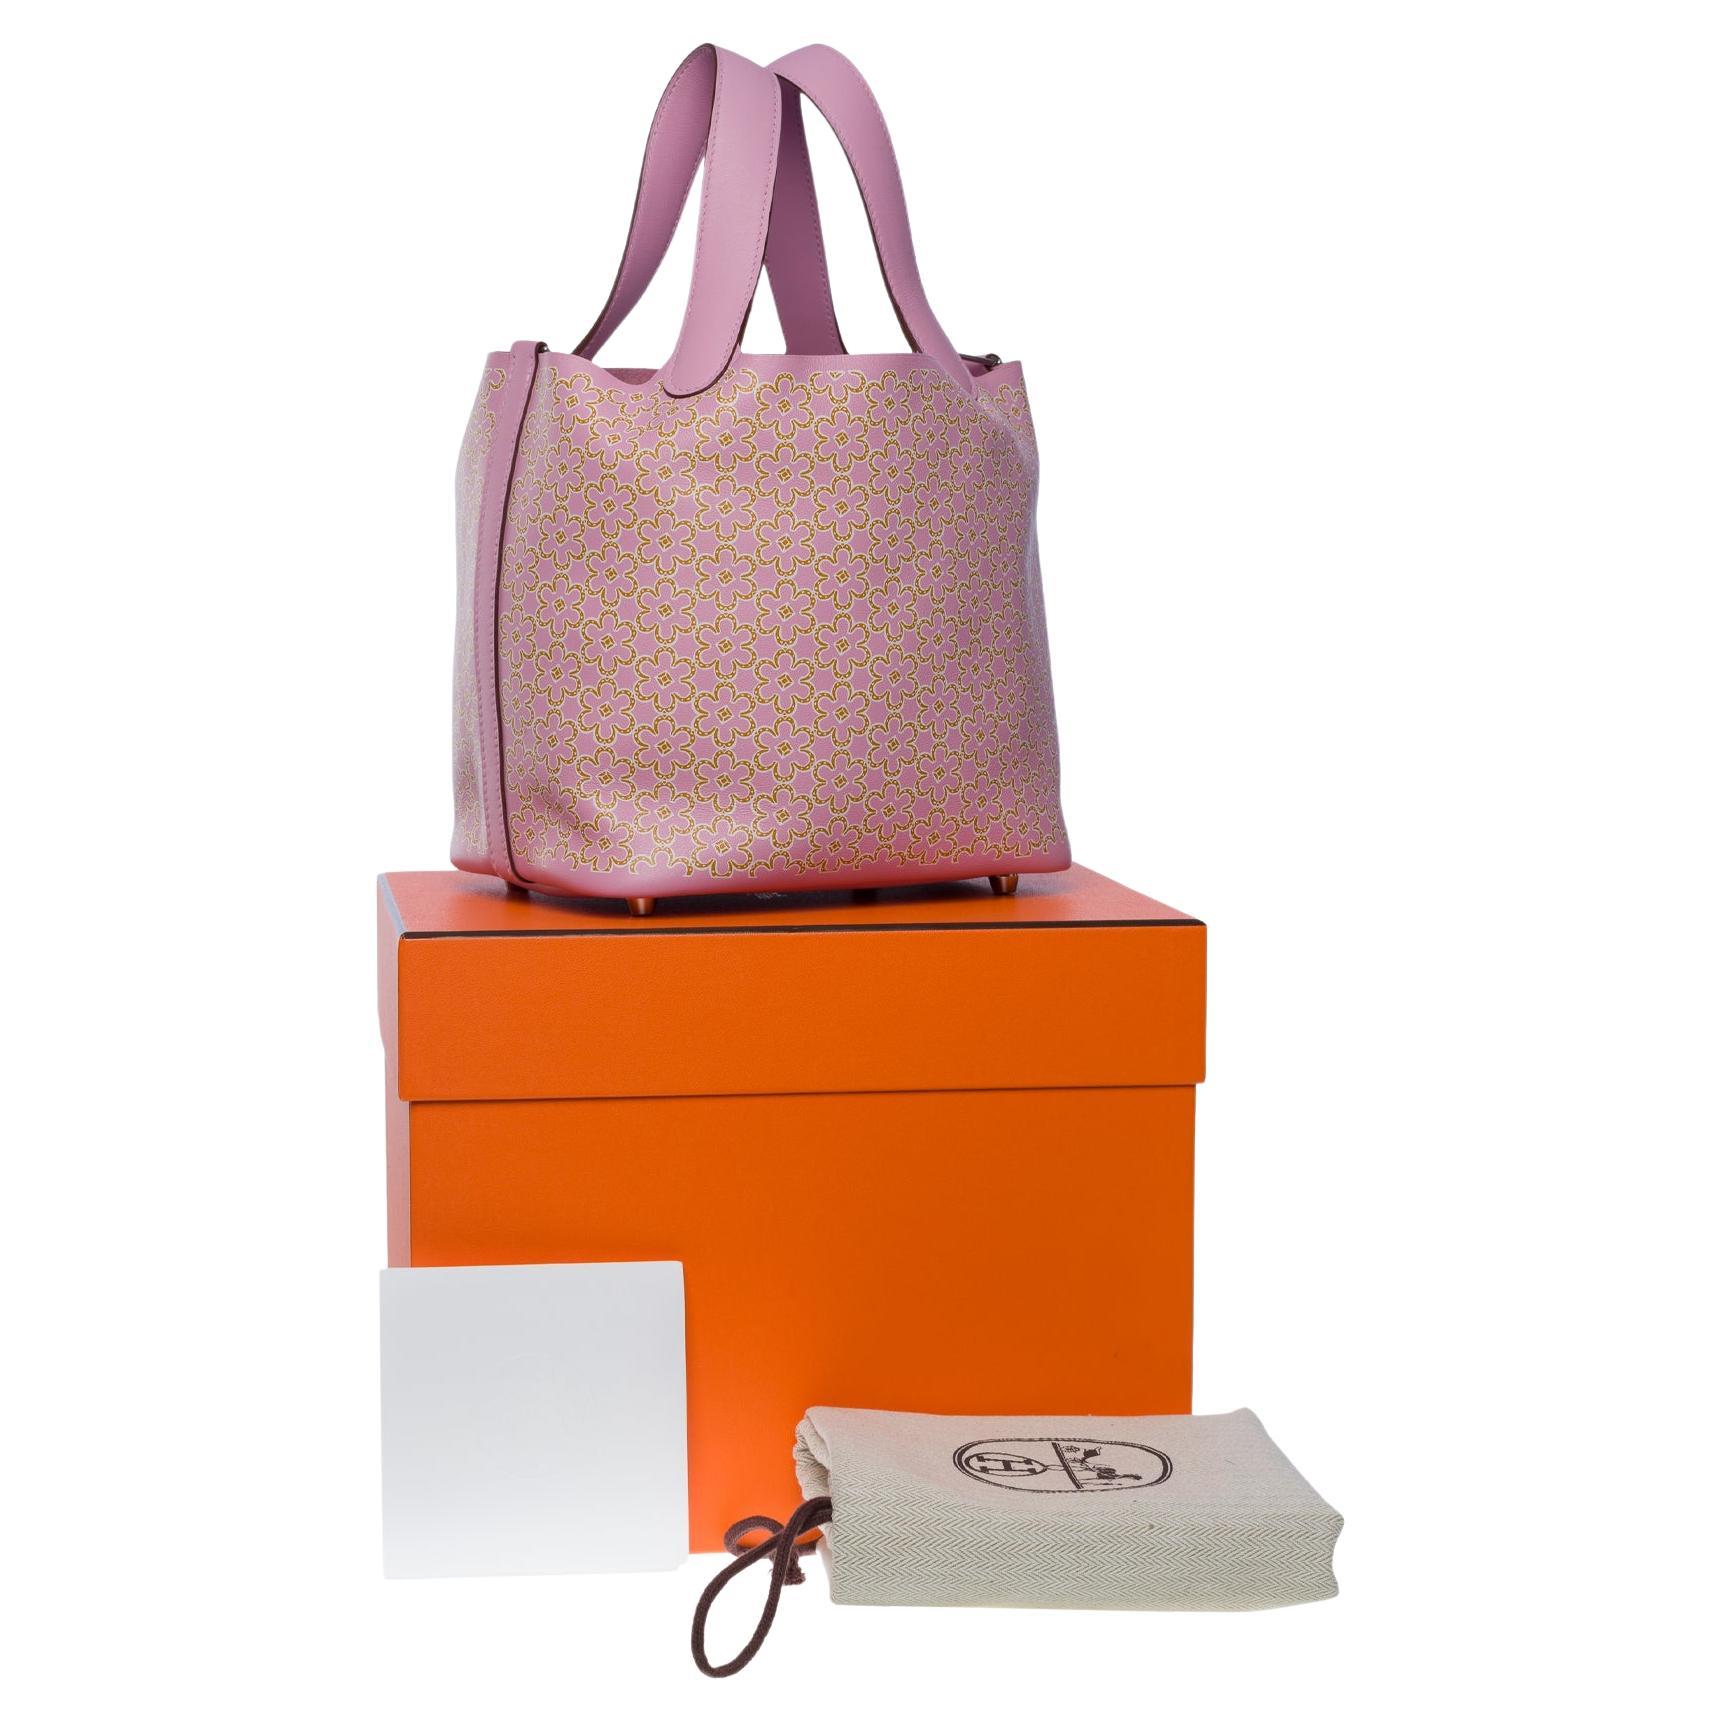 New Hermès Picotin 18 Lucky Daisy limited edition in Mauve Sylvestre Swift, SHW For Sale